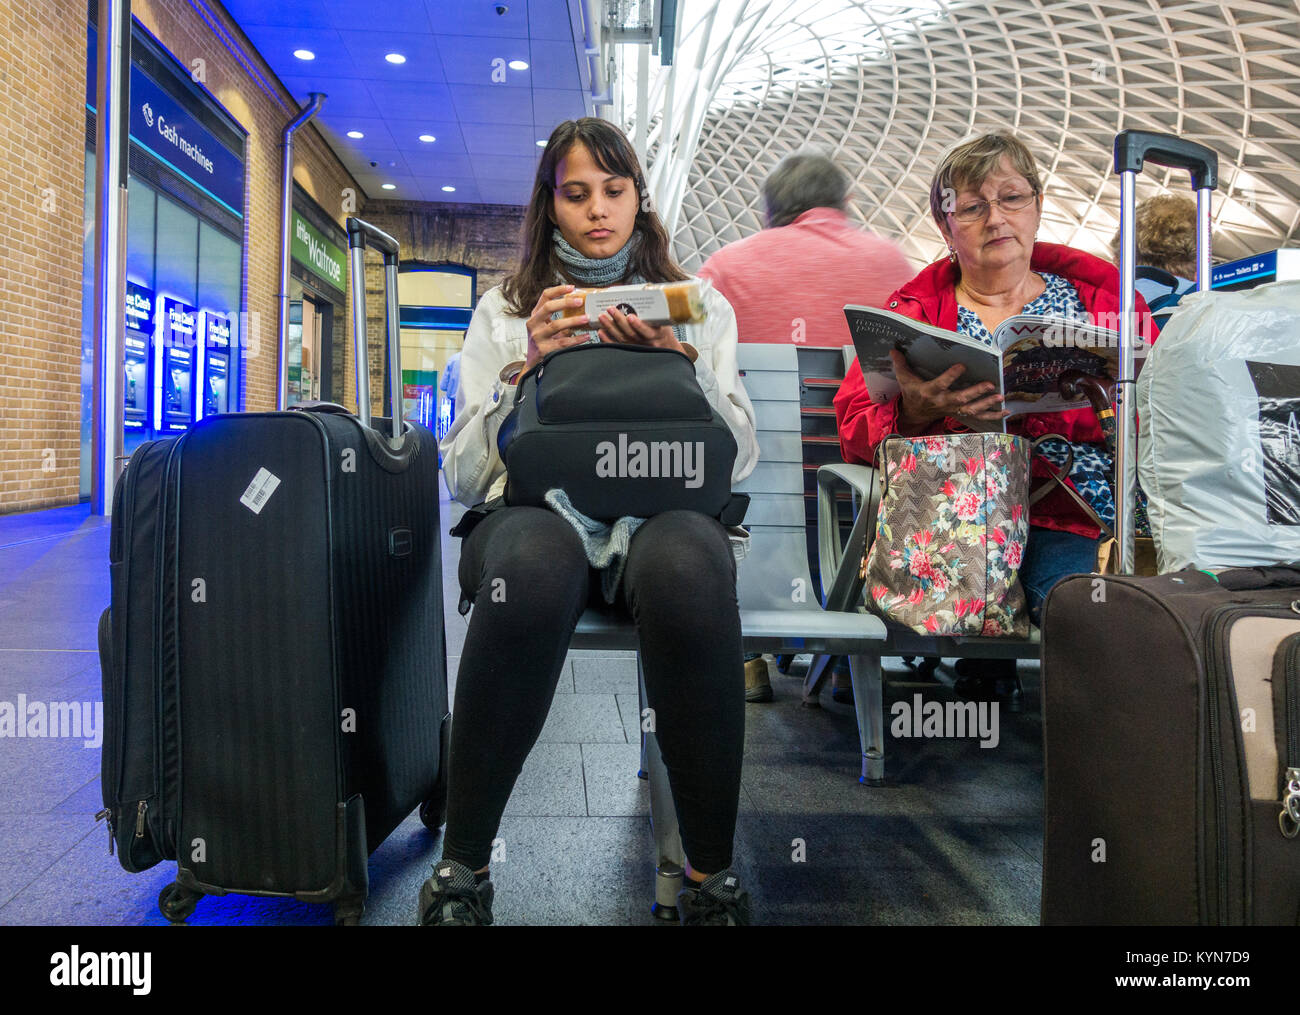 Two women sitting on a bench with luggage, one reading a magazine, the other about to eat a sandwich. Kings Cross train station, London, England, UK. Stock Photo